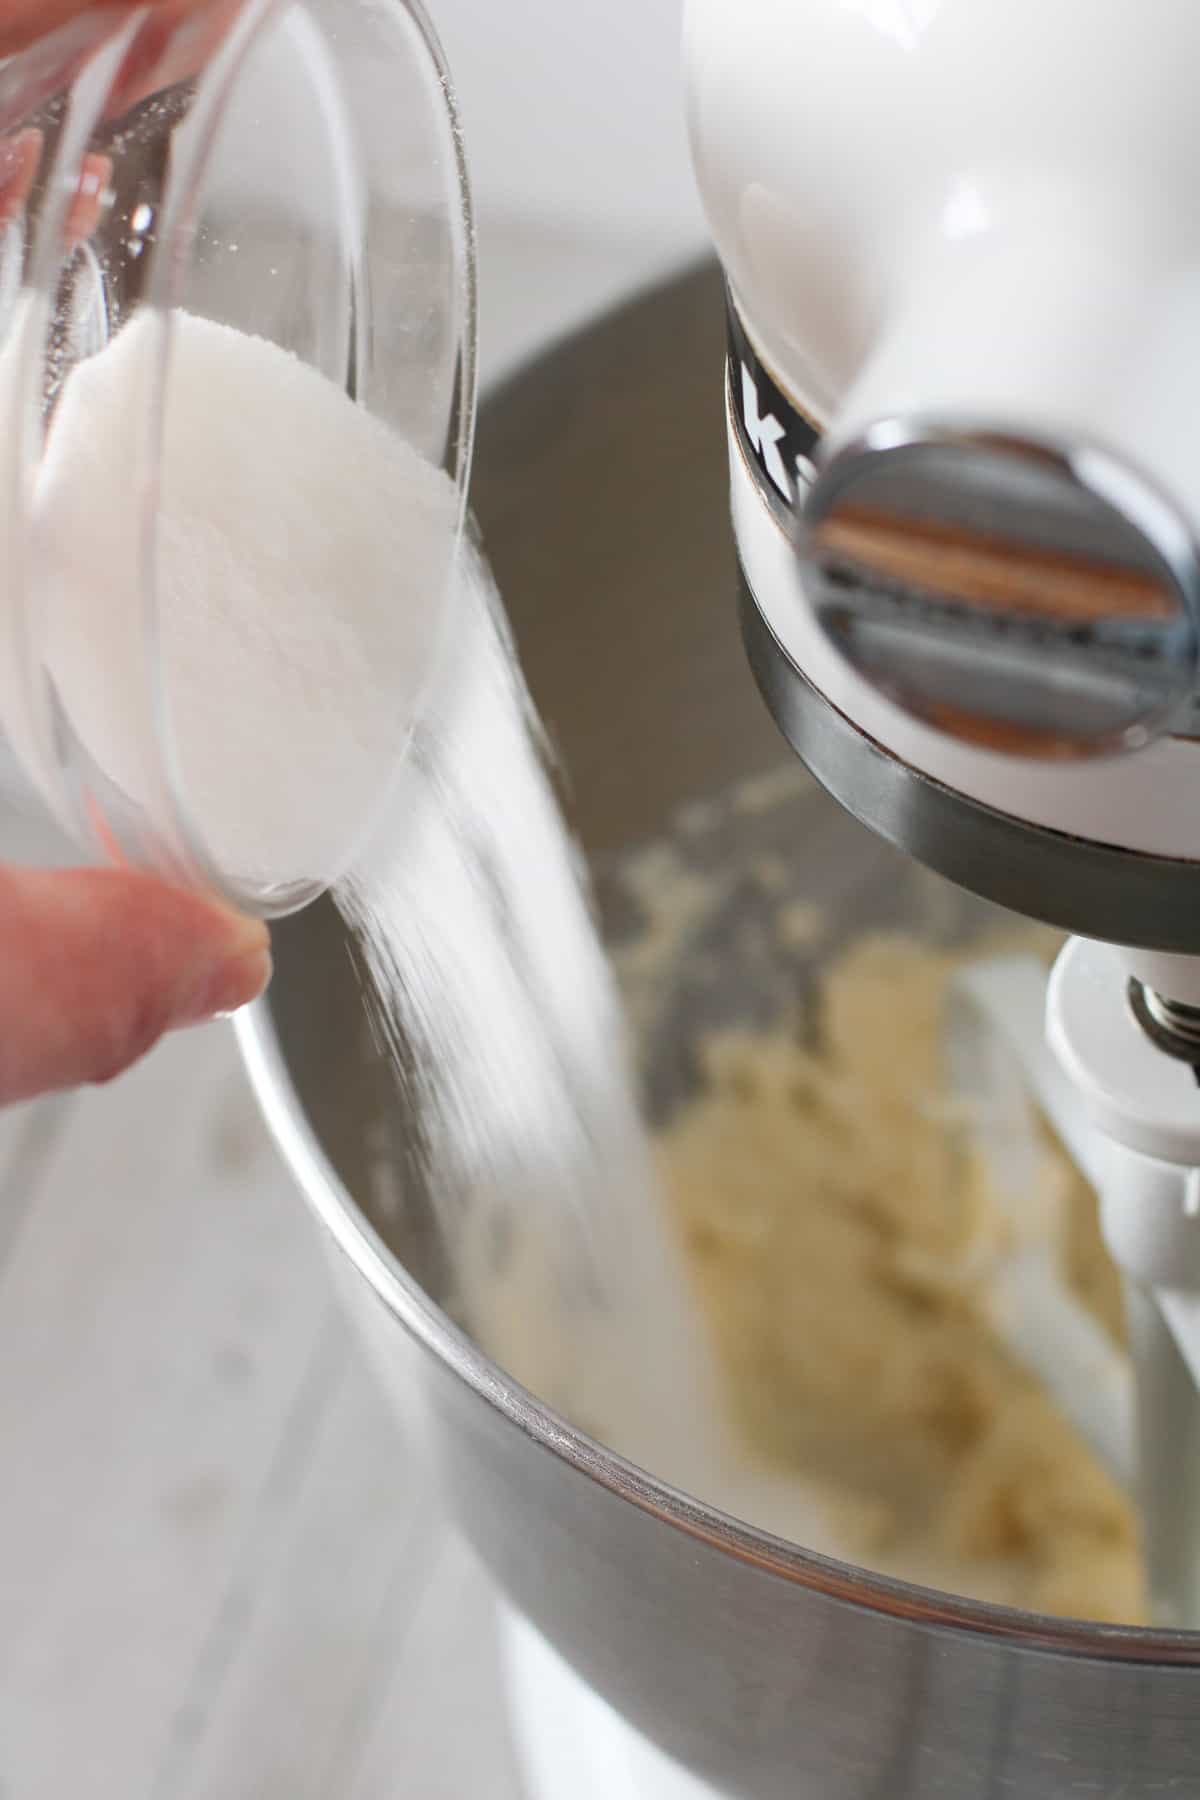 Kitchenaid mixer with cake batter in it.